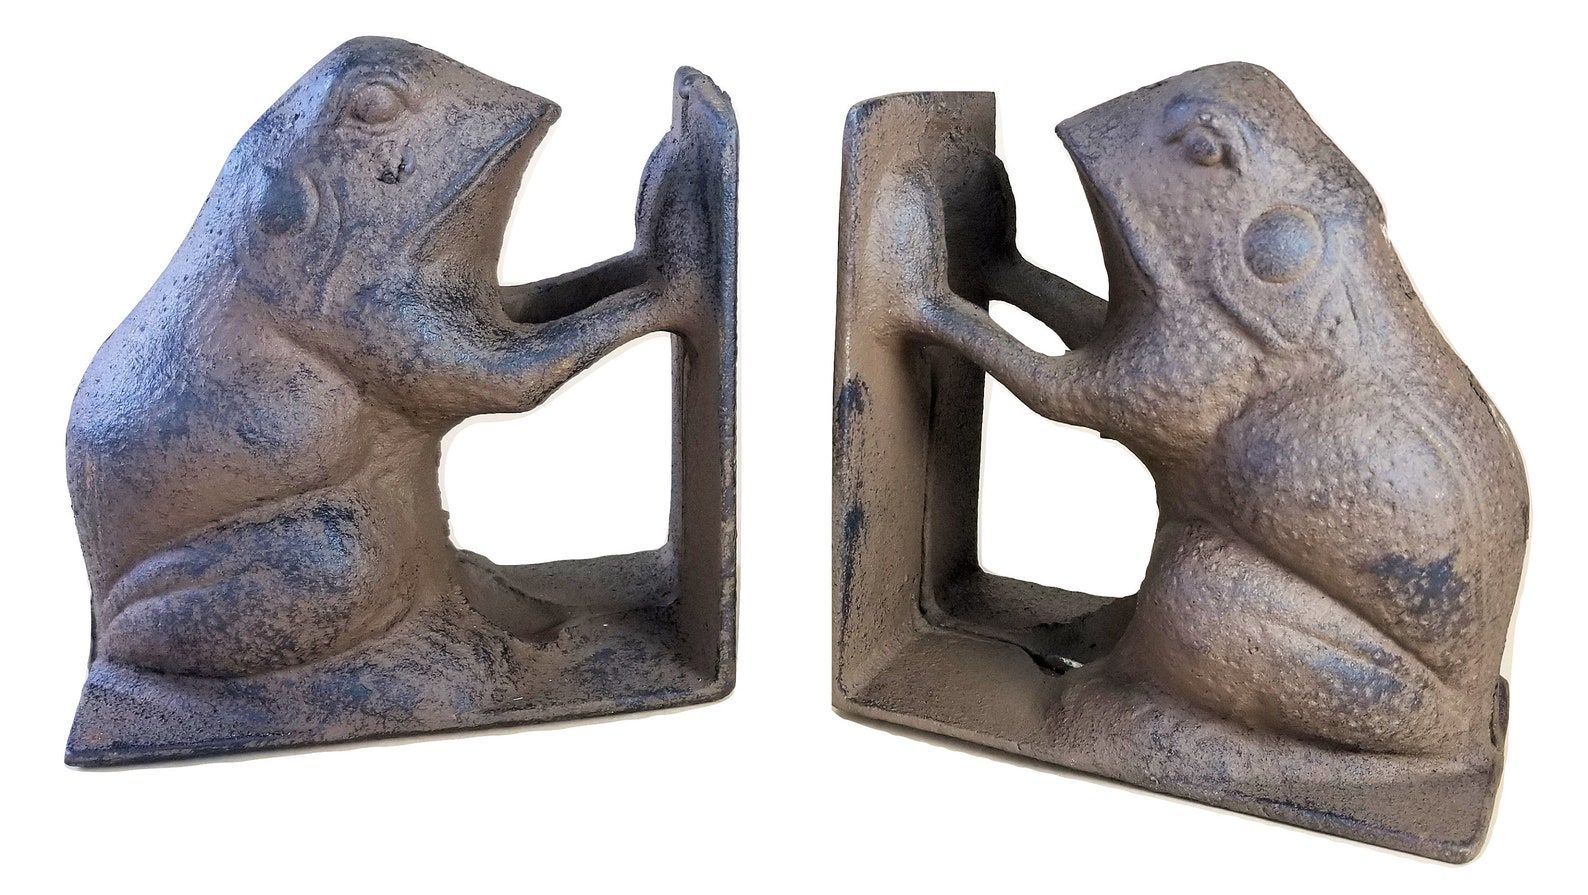 Two cast iron bookends shaped like large brown toads with two of their legs up in the air.